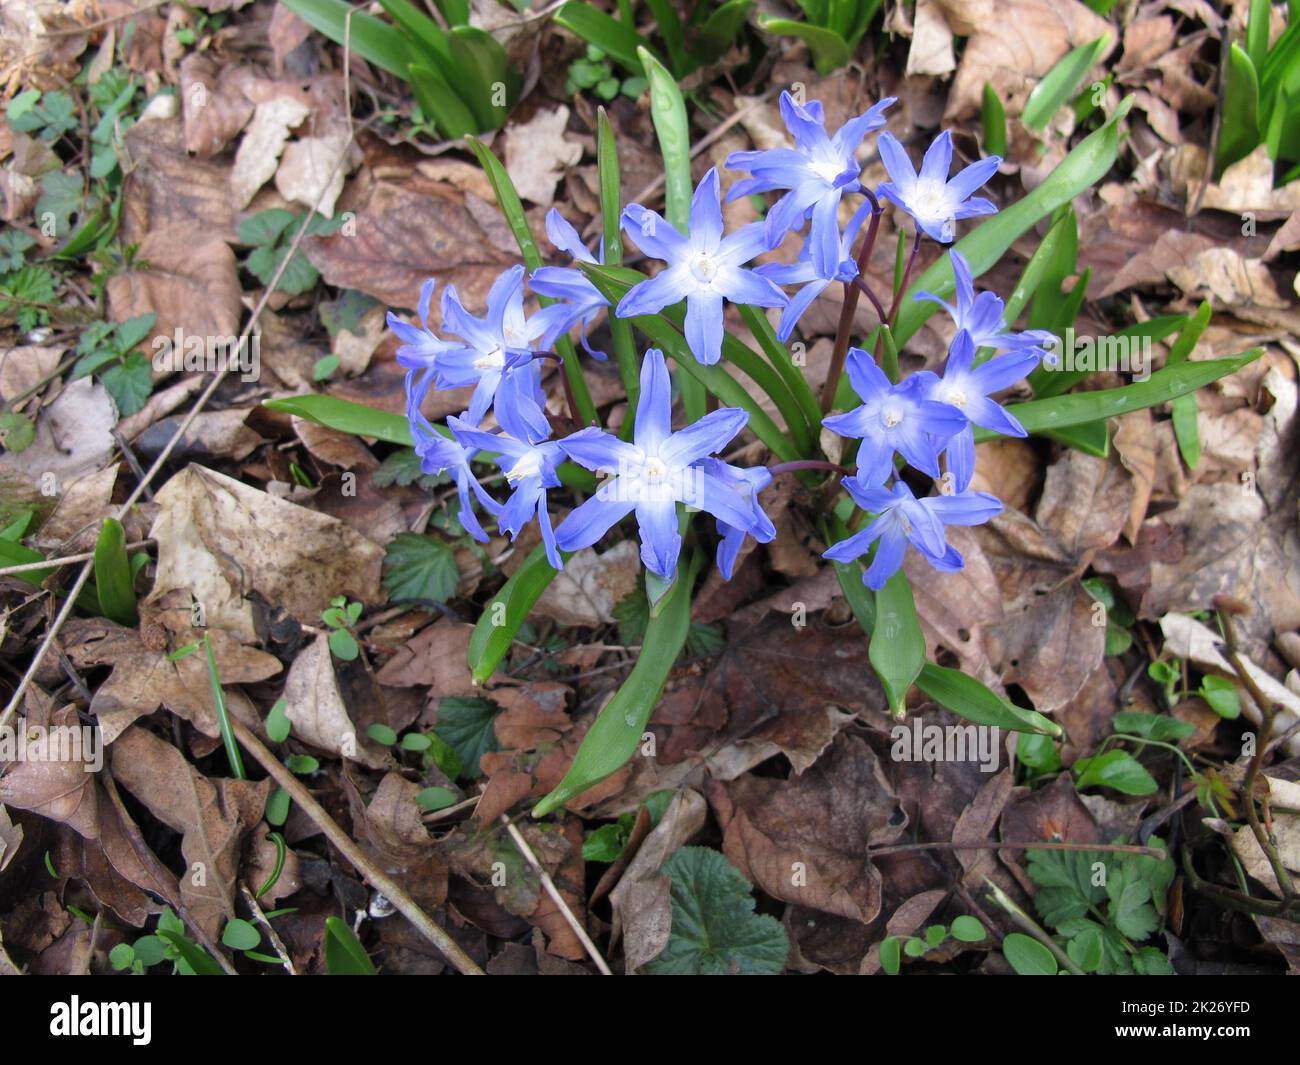 Forbes glory-of-the-snow with blue flowers, Scilla forbesii Stock Photo